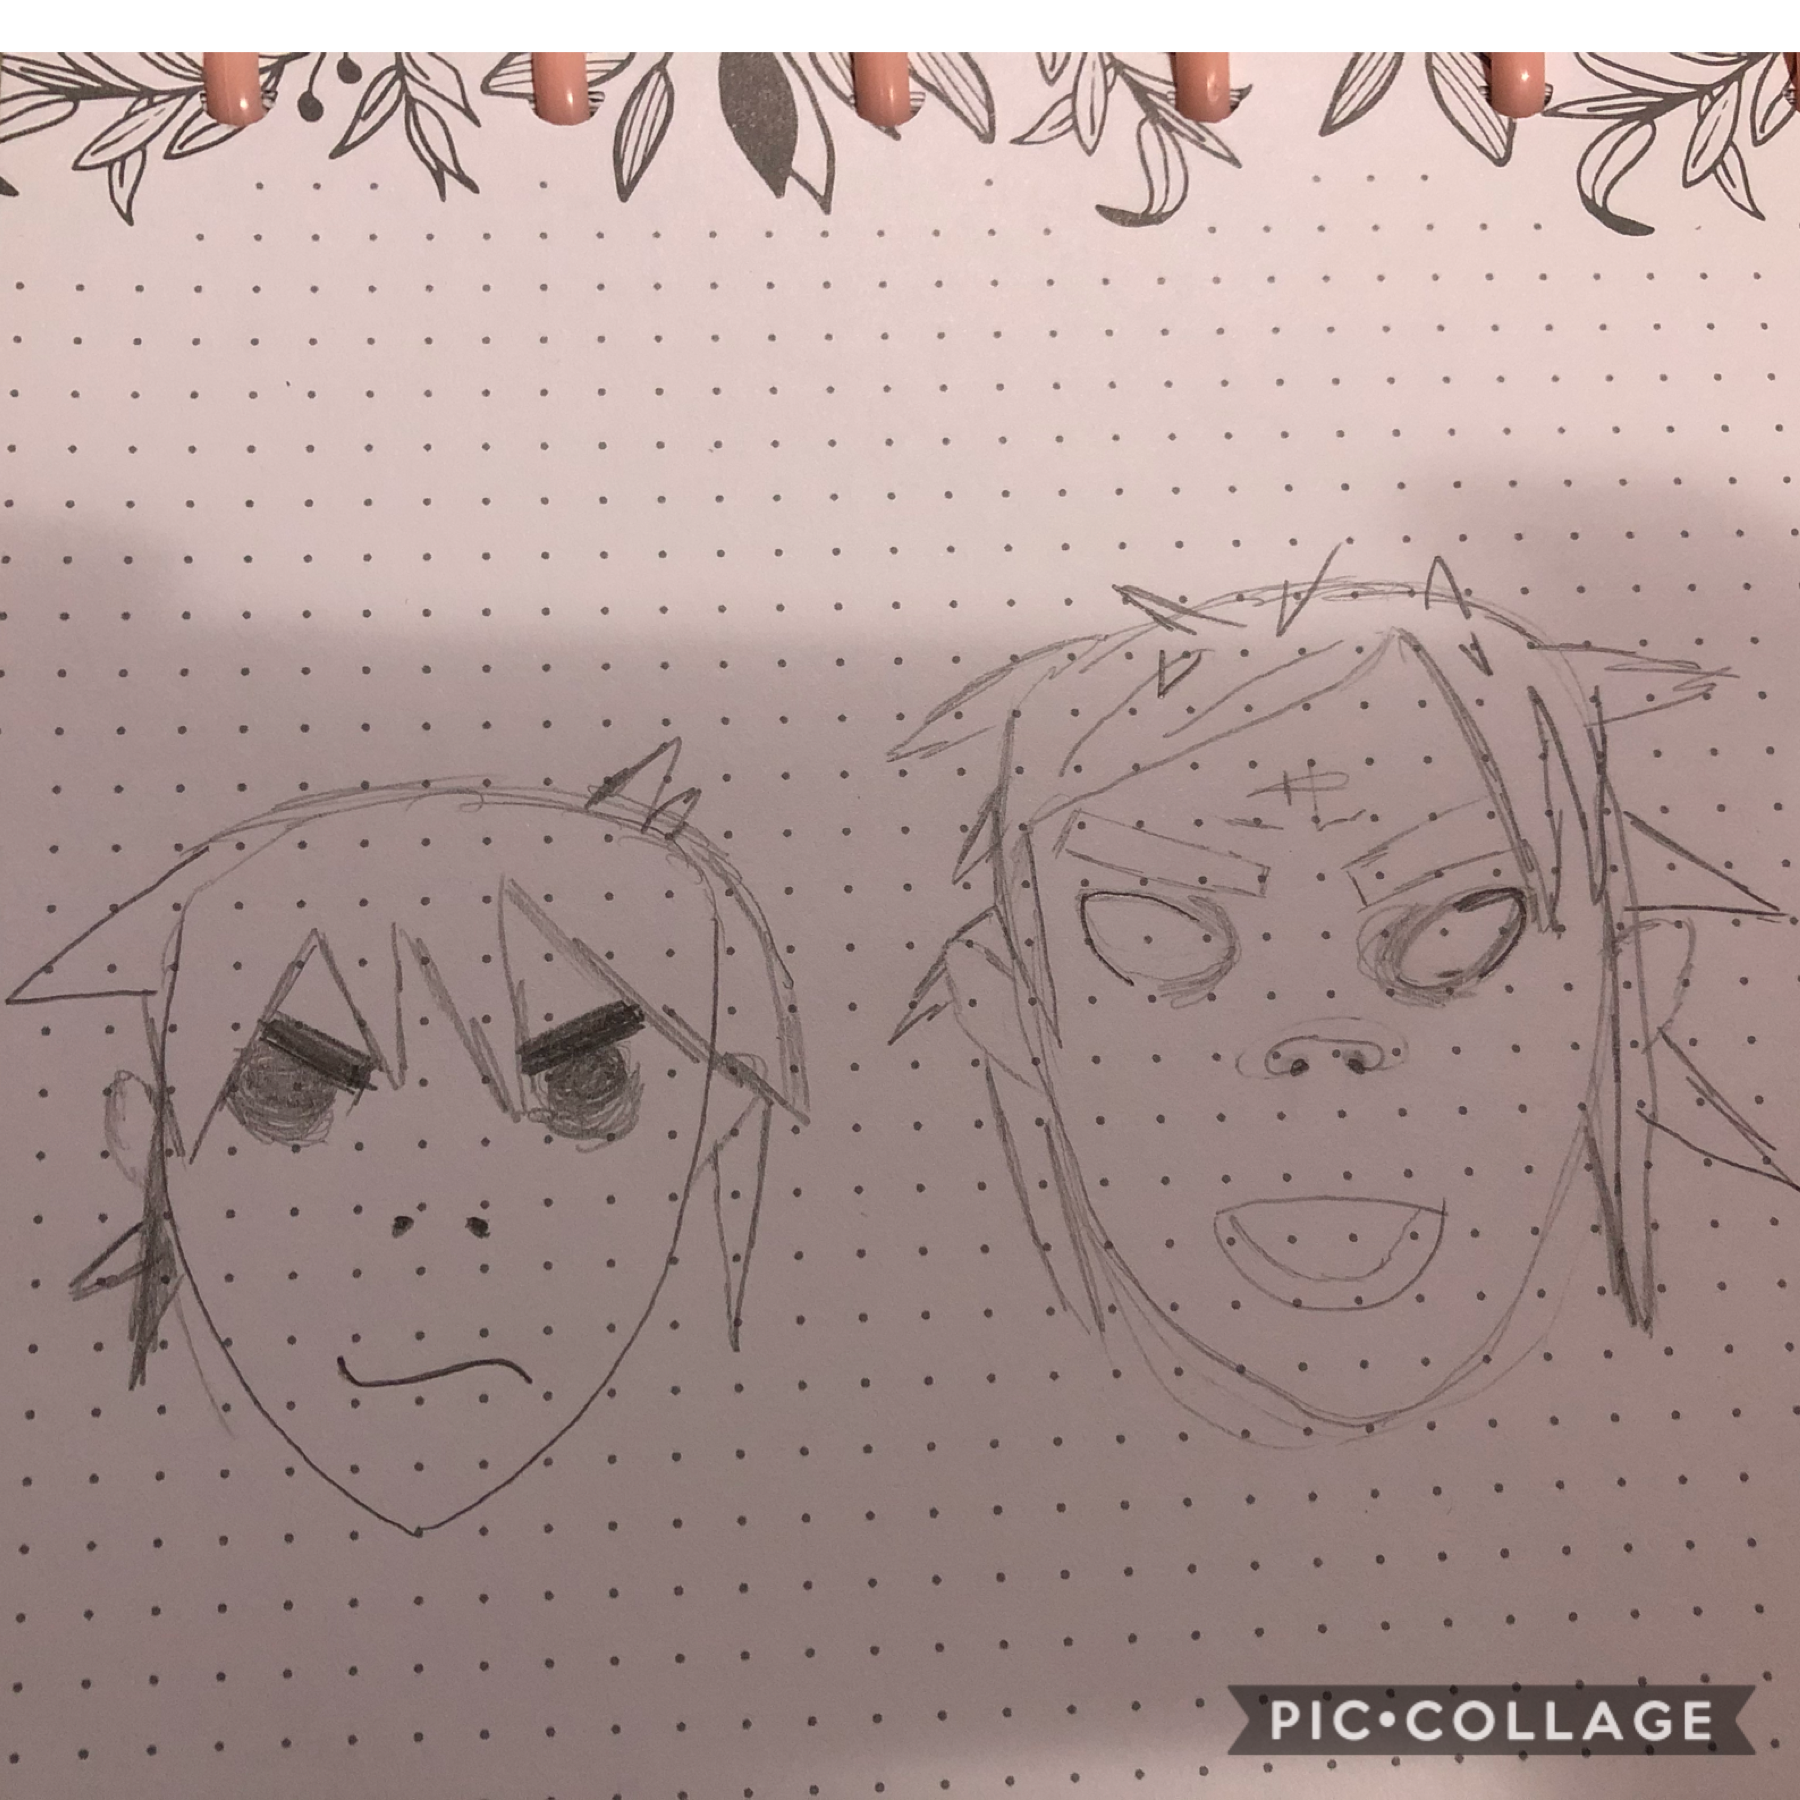 There was an attempt 
It’s supposed to be gorillaz